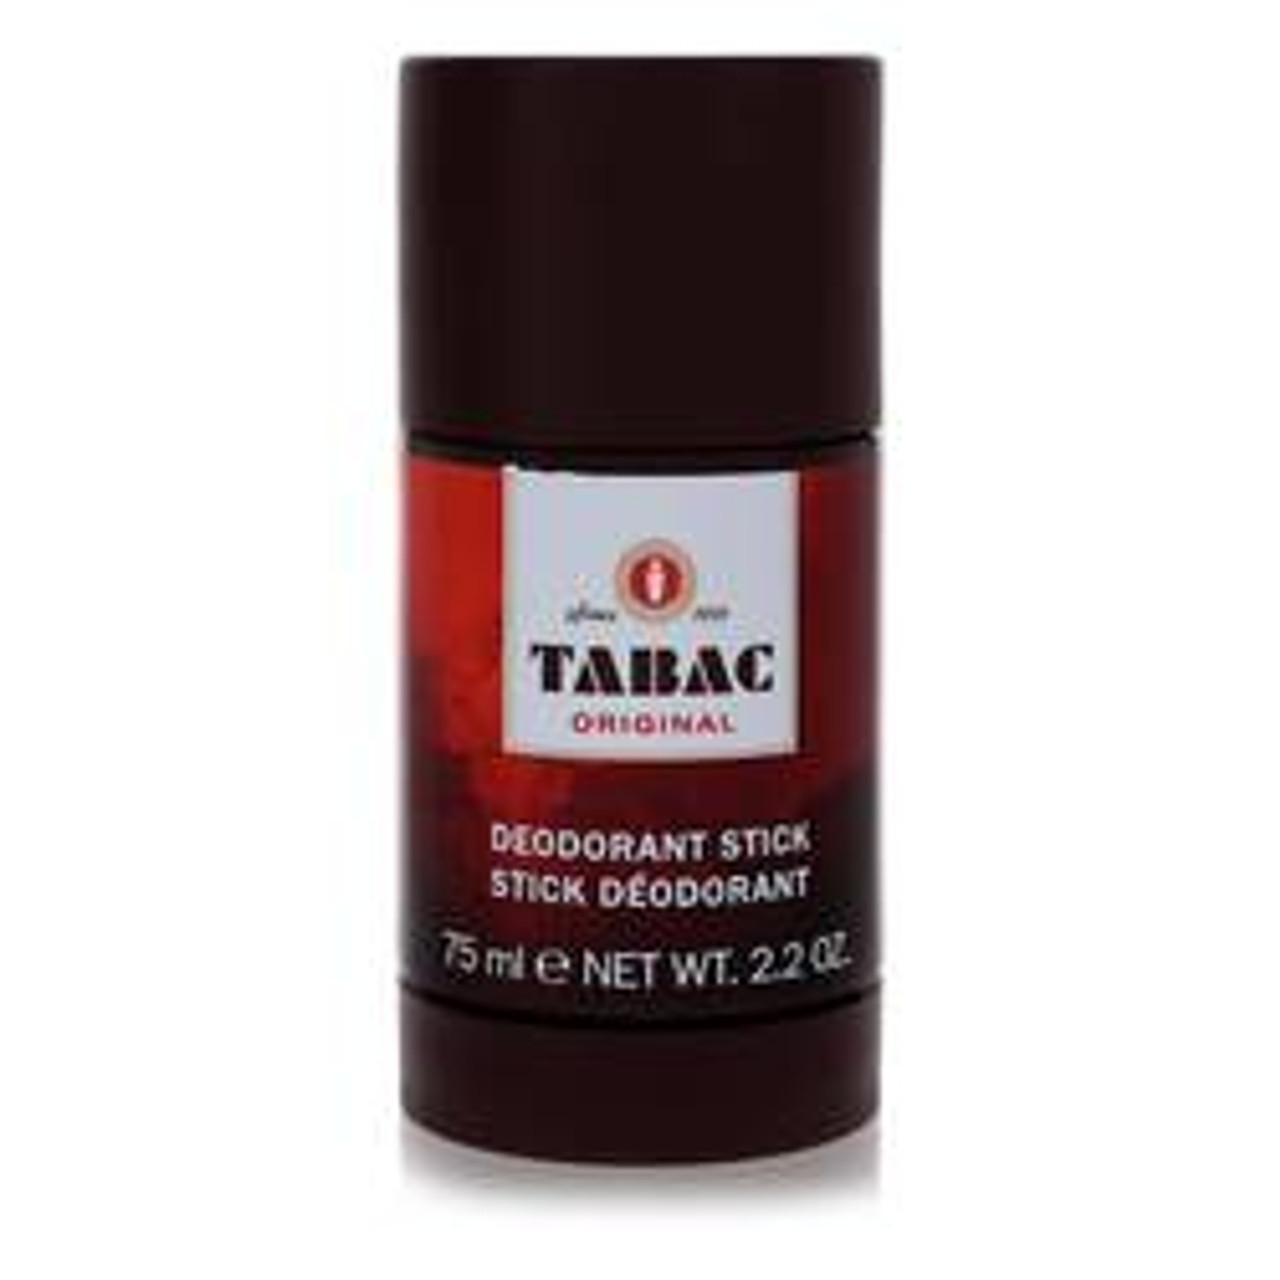 Tabac Cologne By Maurer & Wirtz Deodorant Stick 2.2 oz for Men - [From 23.00 - Choose pk Qty ] - *Ships from Miami